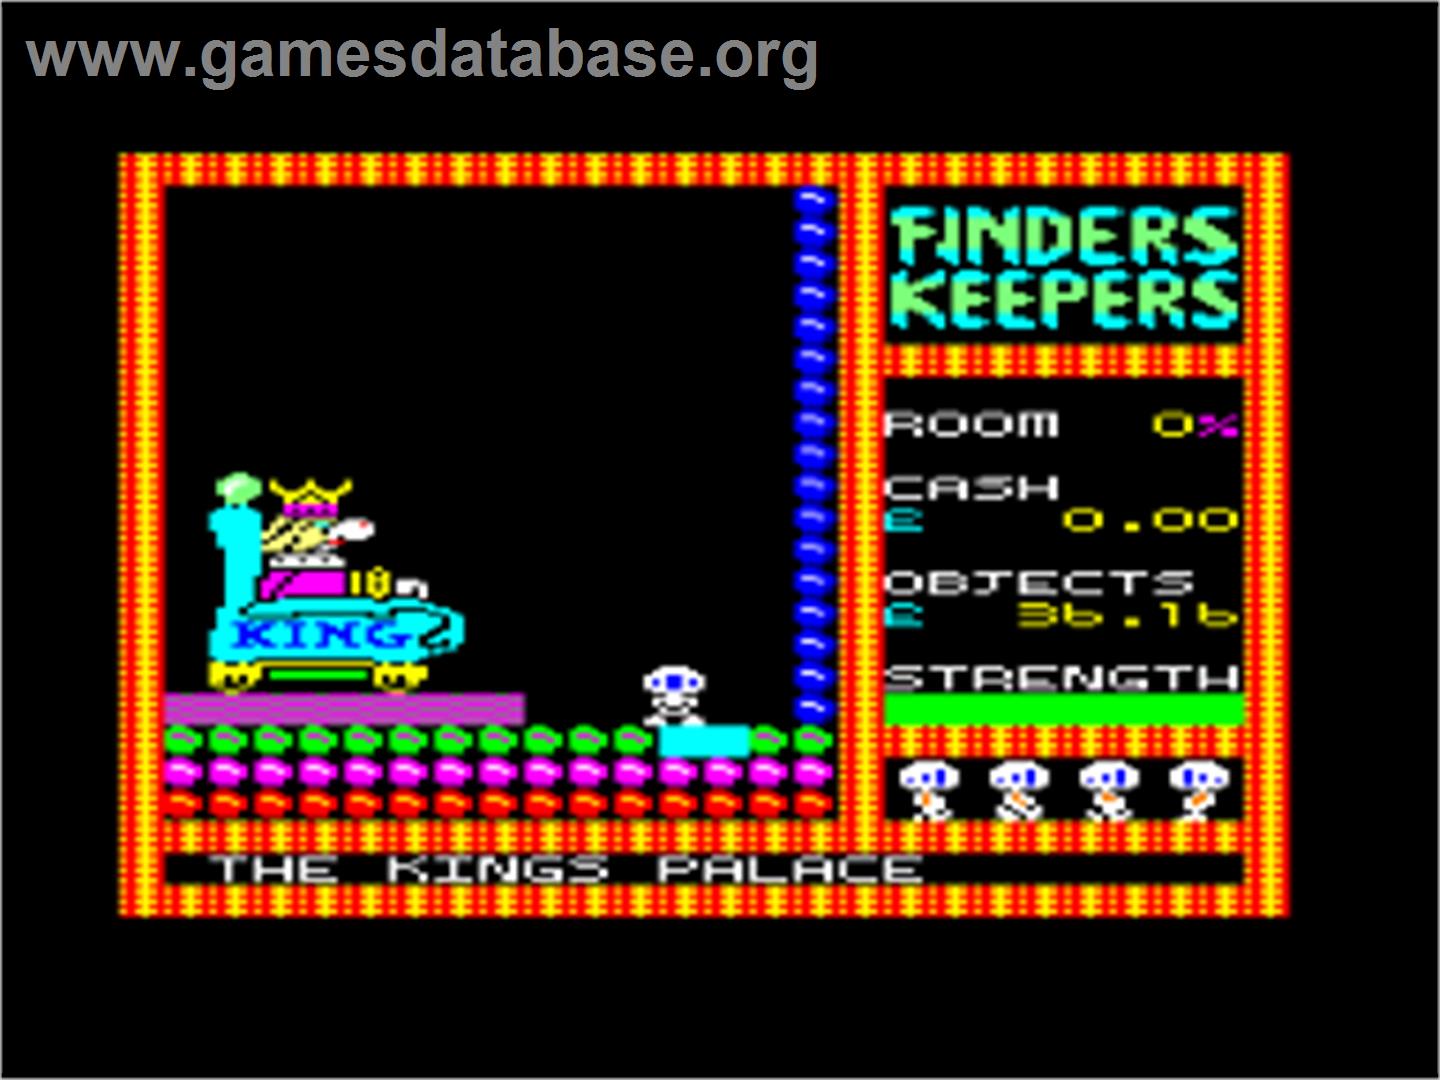 Finders Keepers - Amstrad CPC - Artwork - In Game